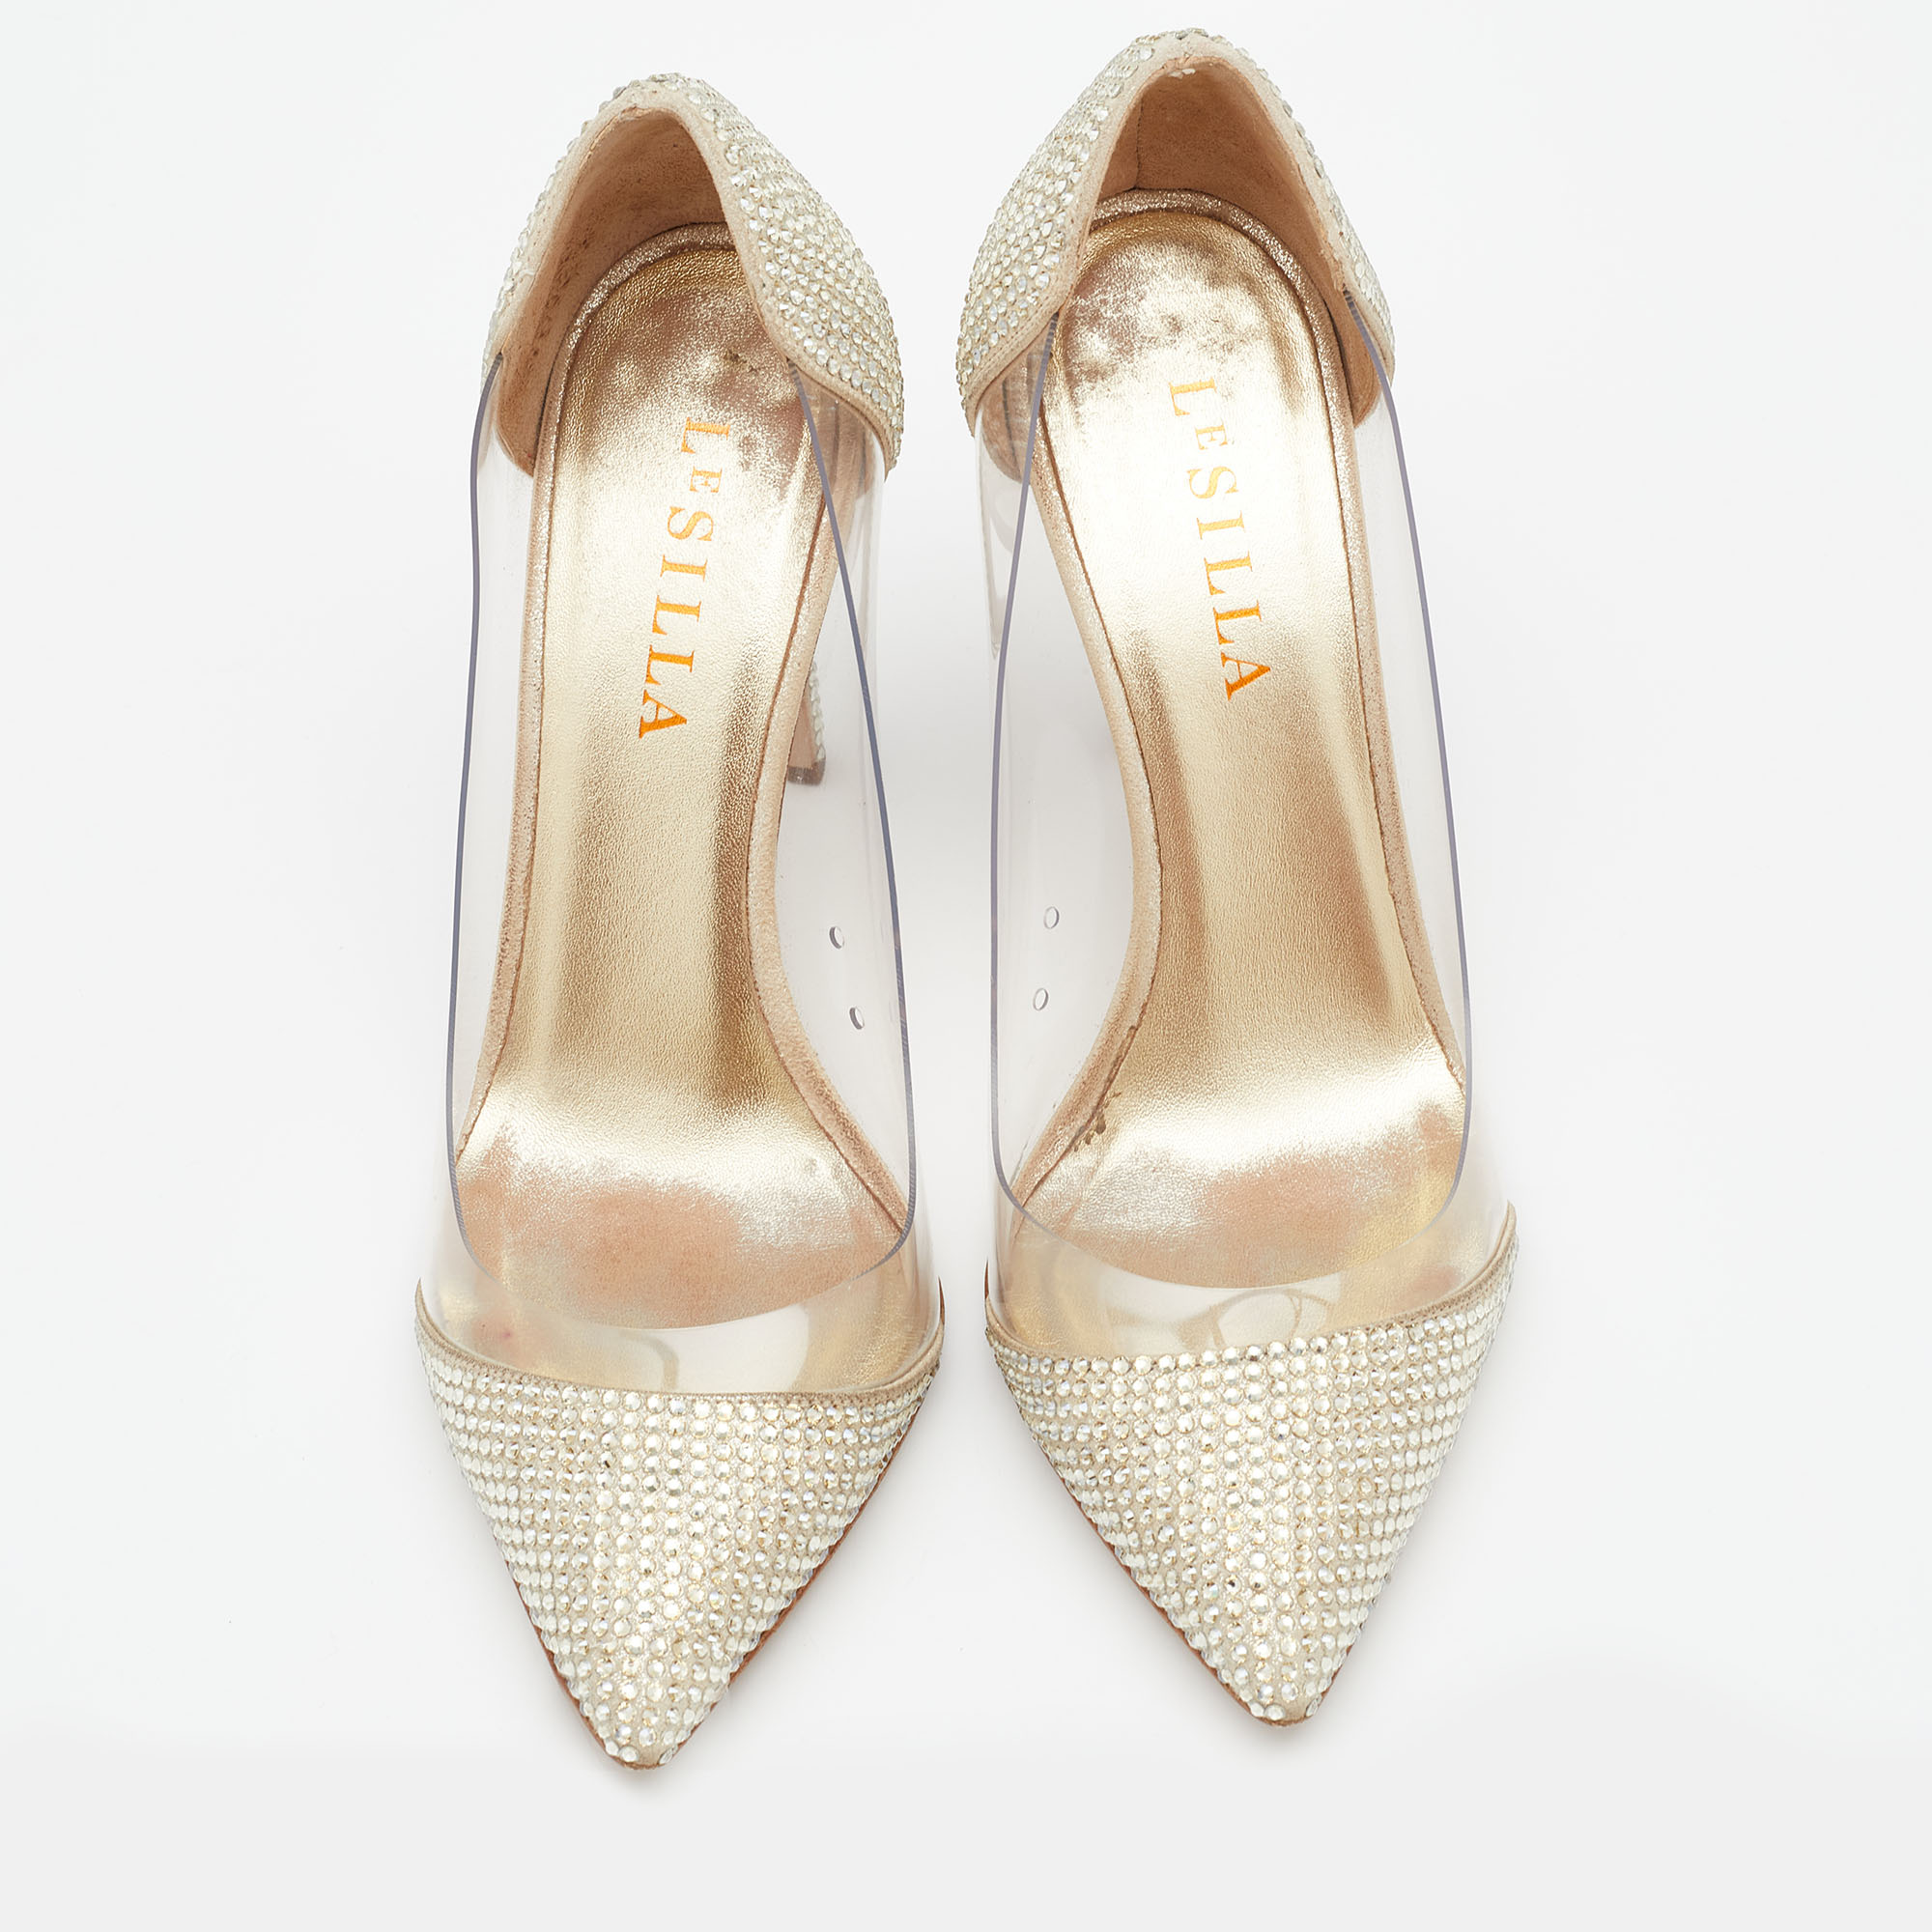 Le Silla Metallic Gold Suede And PVC Crystal Embellished Pumps Size 37